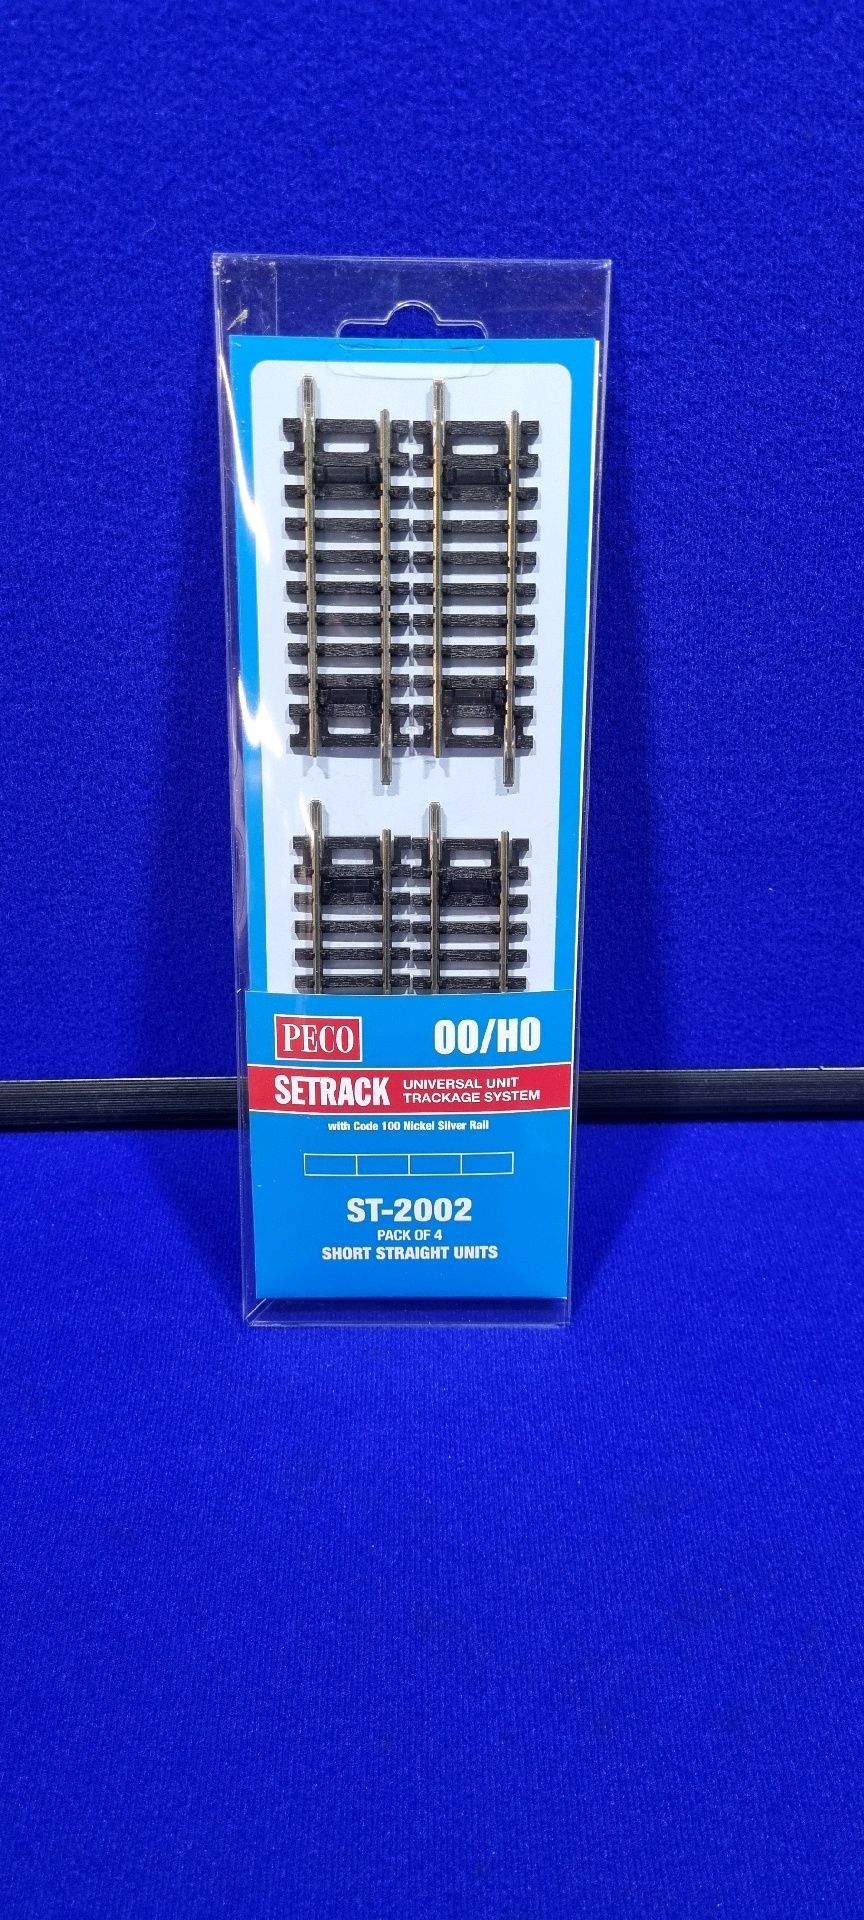 1 X Peco 00/H0 Scale Short Straight ST-2002 RRP £6.16